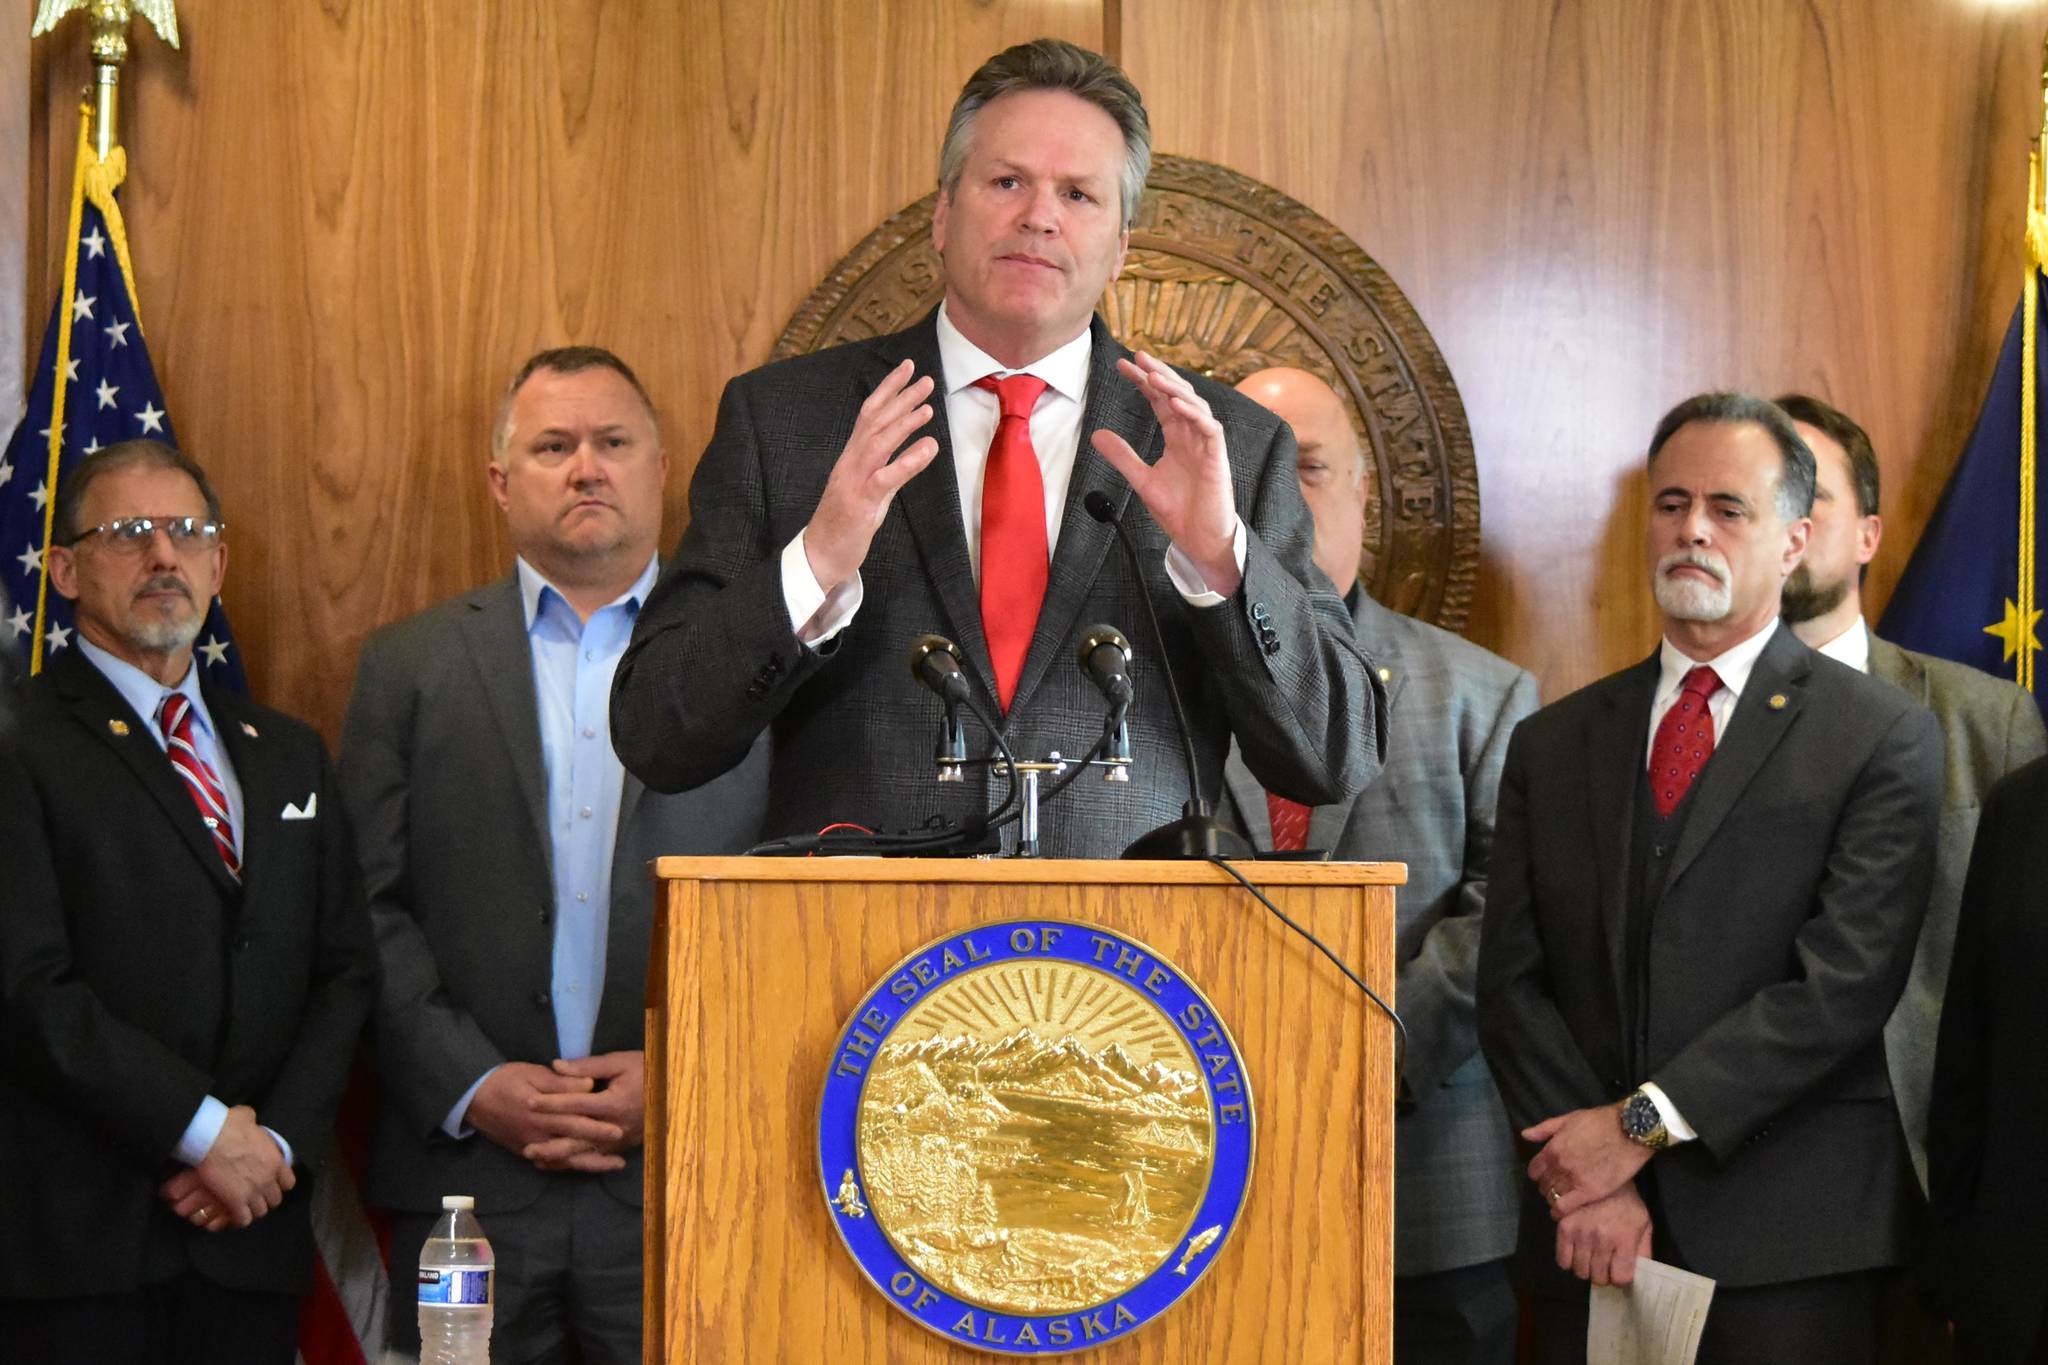 Gov. Mike Dunleavy made changes to a proposed constitutional amendment in a news conference at the Alaska State Capitol on Wednesday, May 12, 2021, he hopes will set the state on a better fiscal path. (Peter Segall / Juneau Empire)